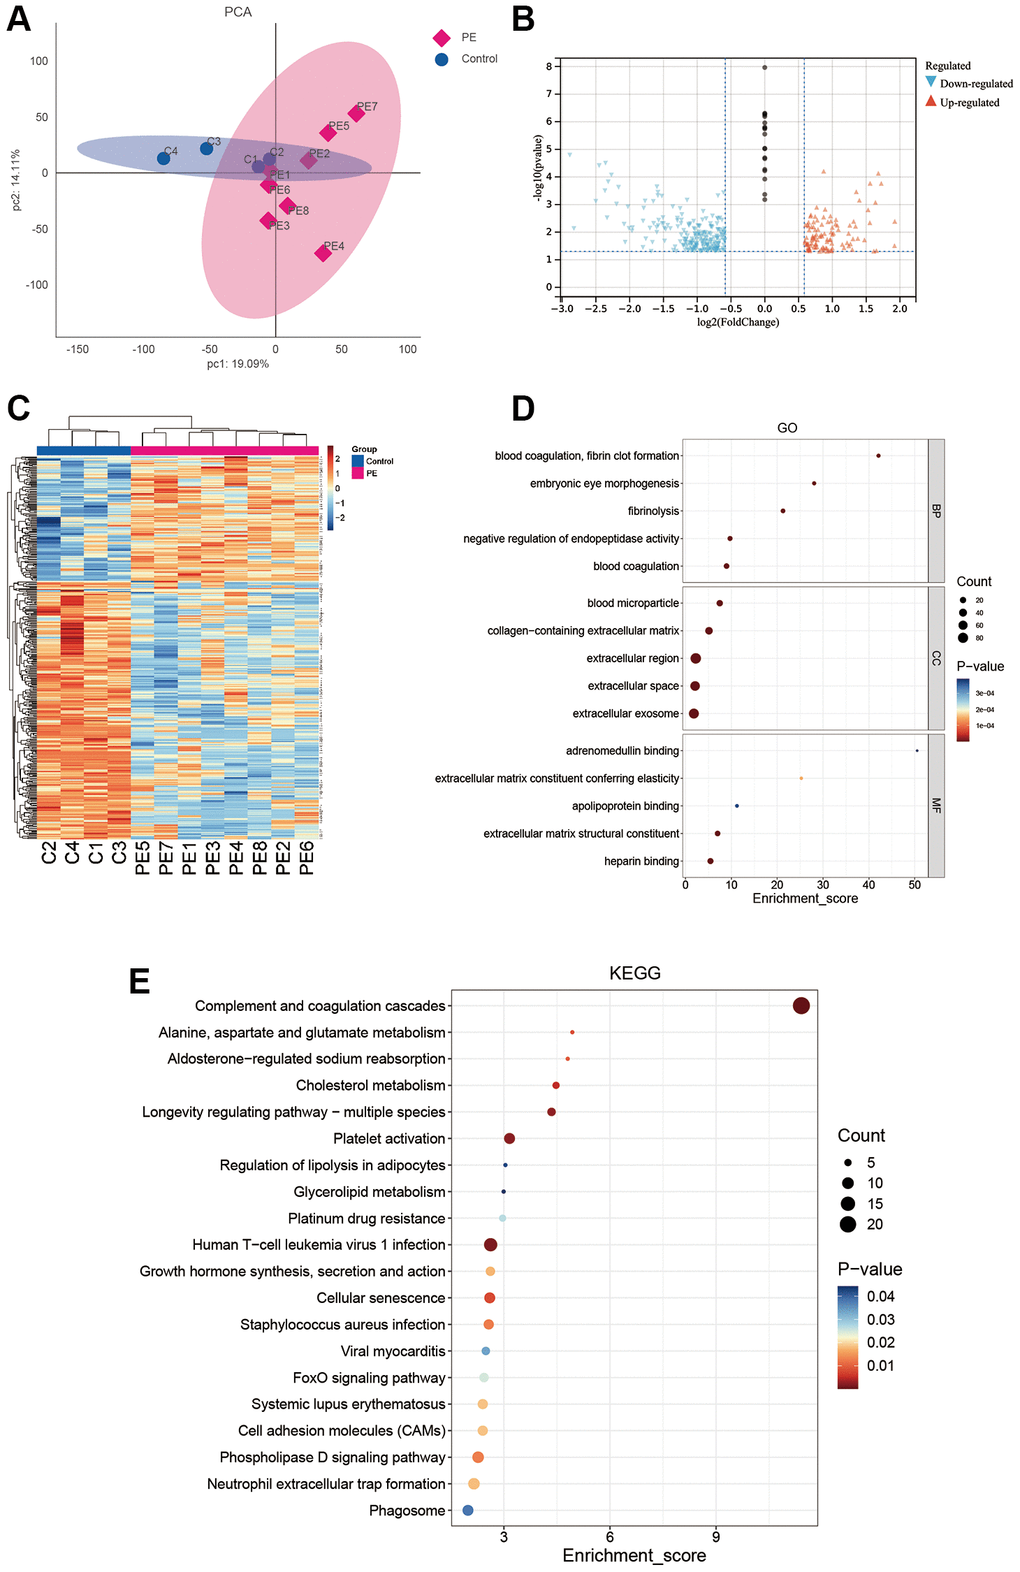 DIA proteomics and functional enrichment analyses. (A) PCA analysis of clinical samples. (B–E) Volcano plot (B), heat map (C), GO enrichment analysis (D), and KEGG enrichment analysis (E) of differentially expressed proteins between the PE group and normal controls.